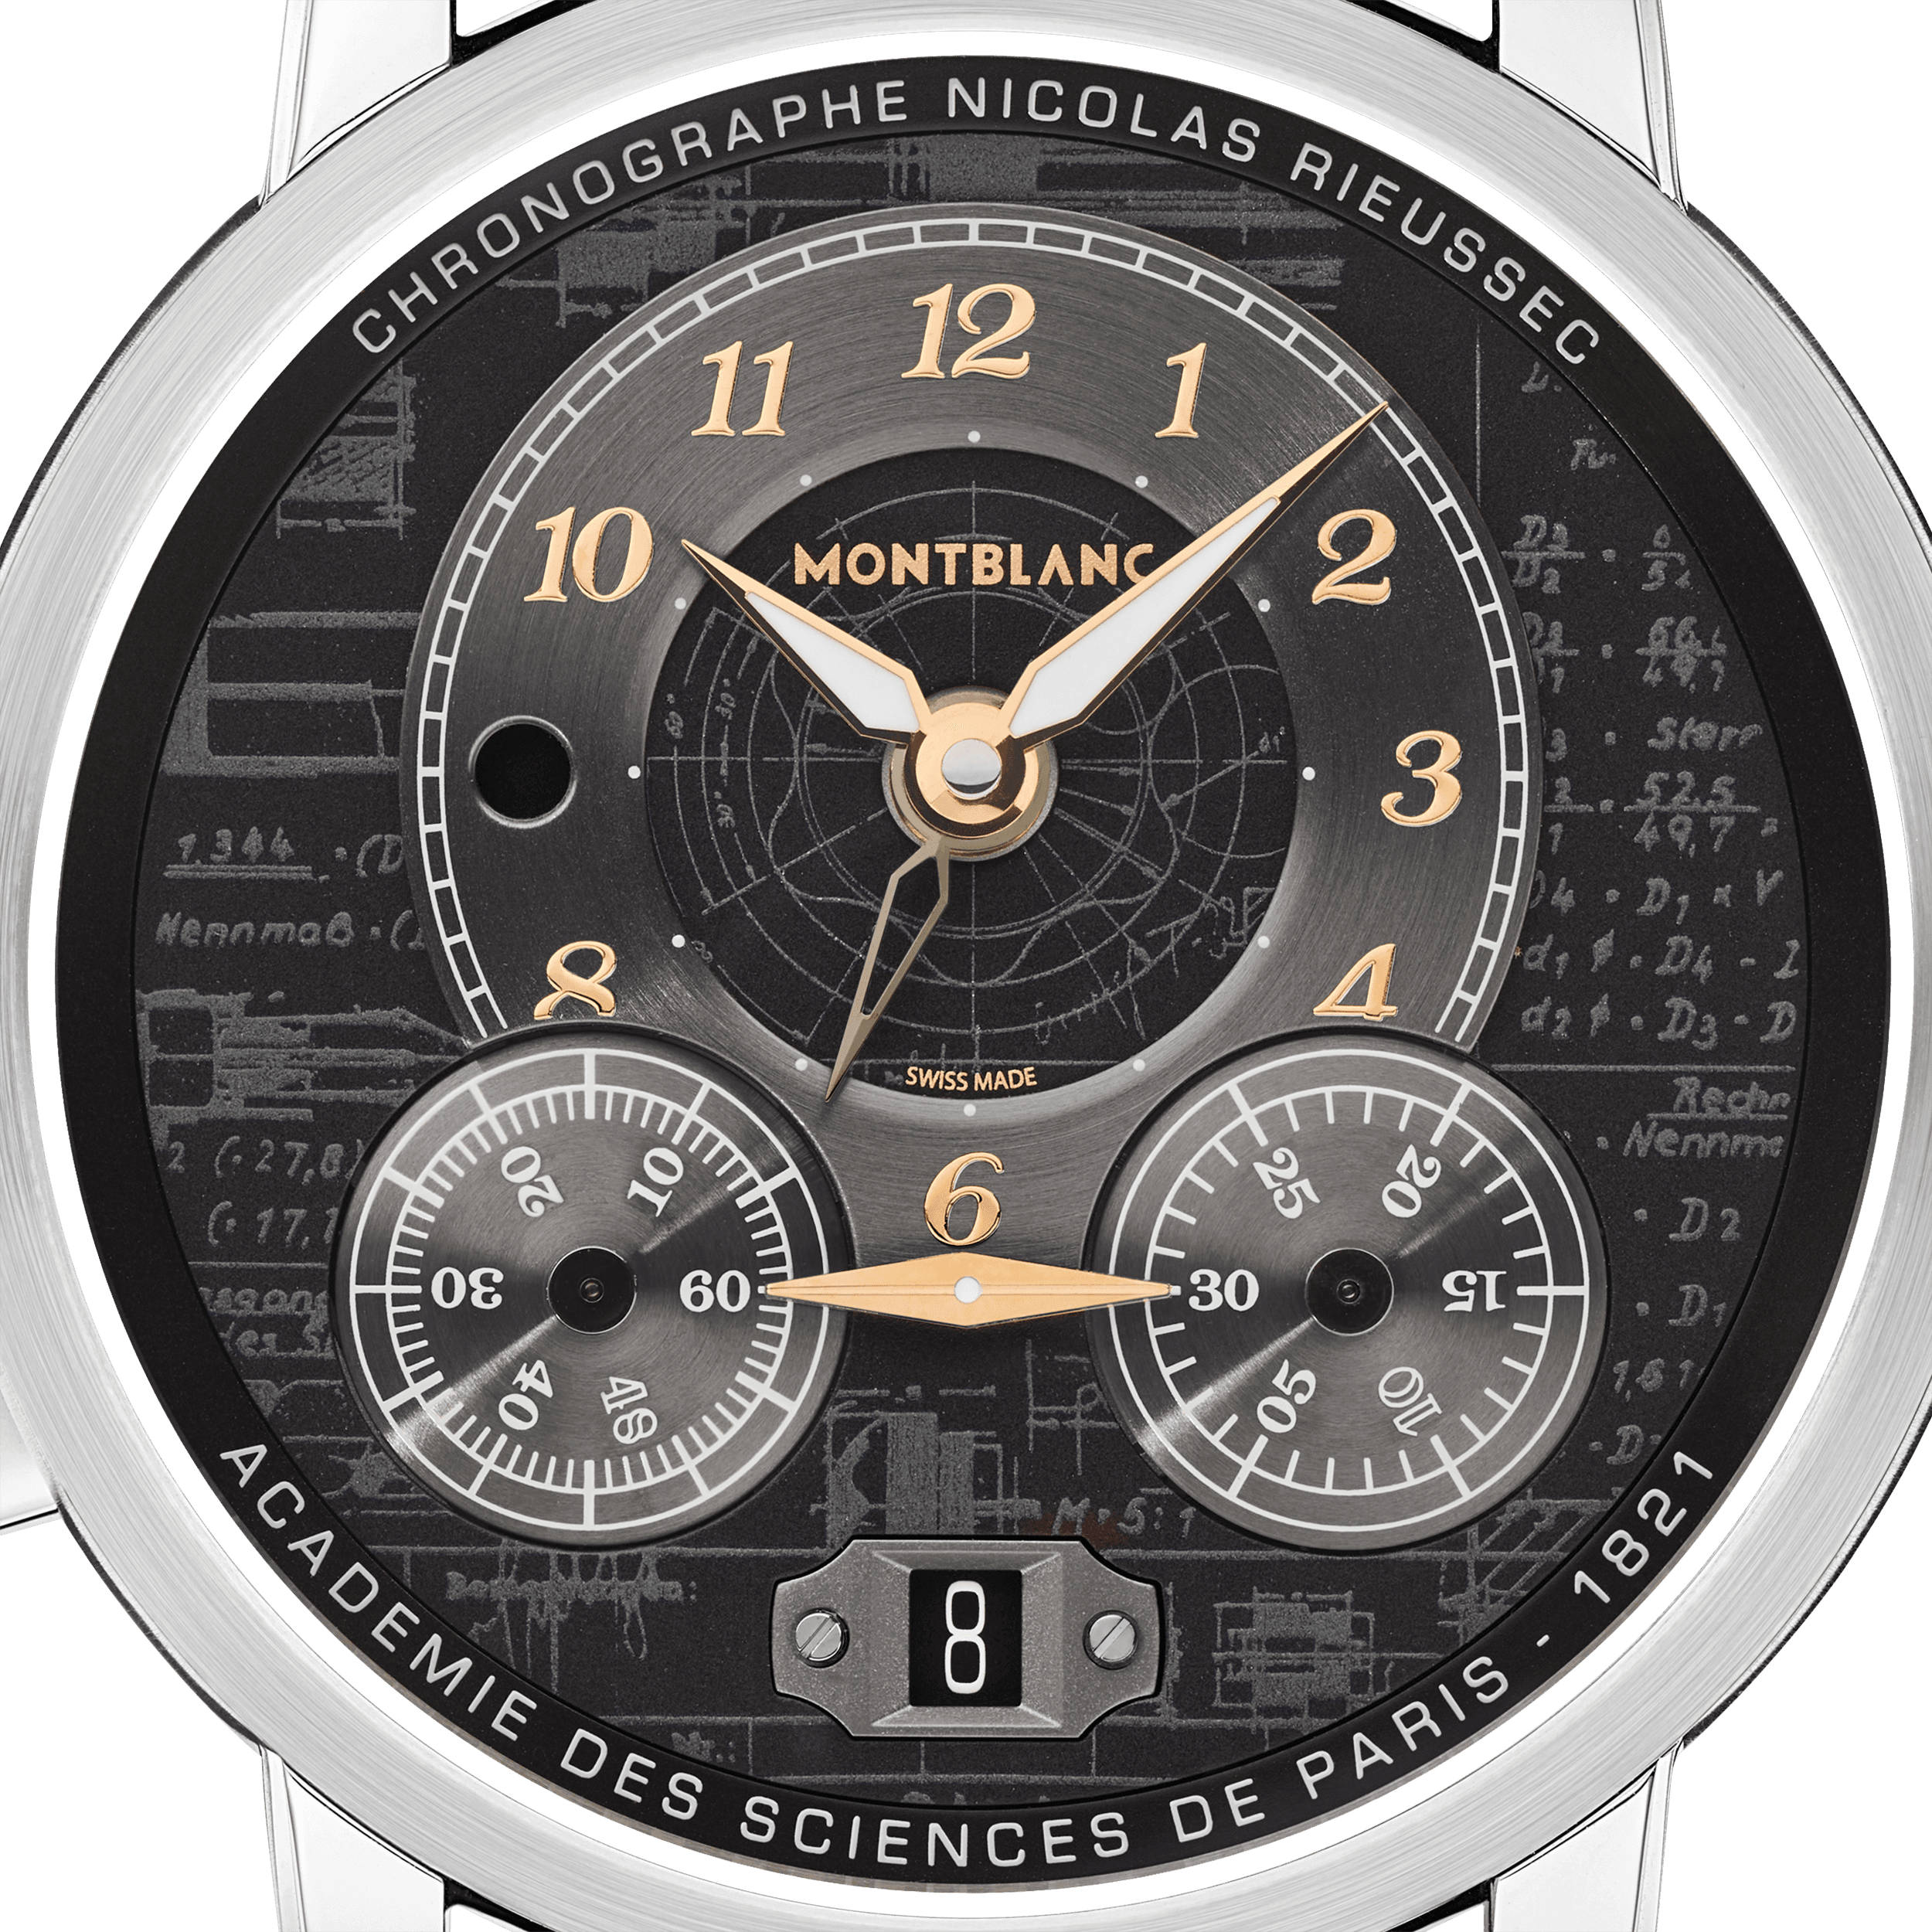 The dial details honor the Montblanc Meisterstück writing device